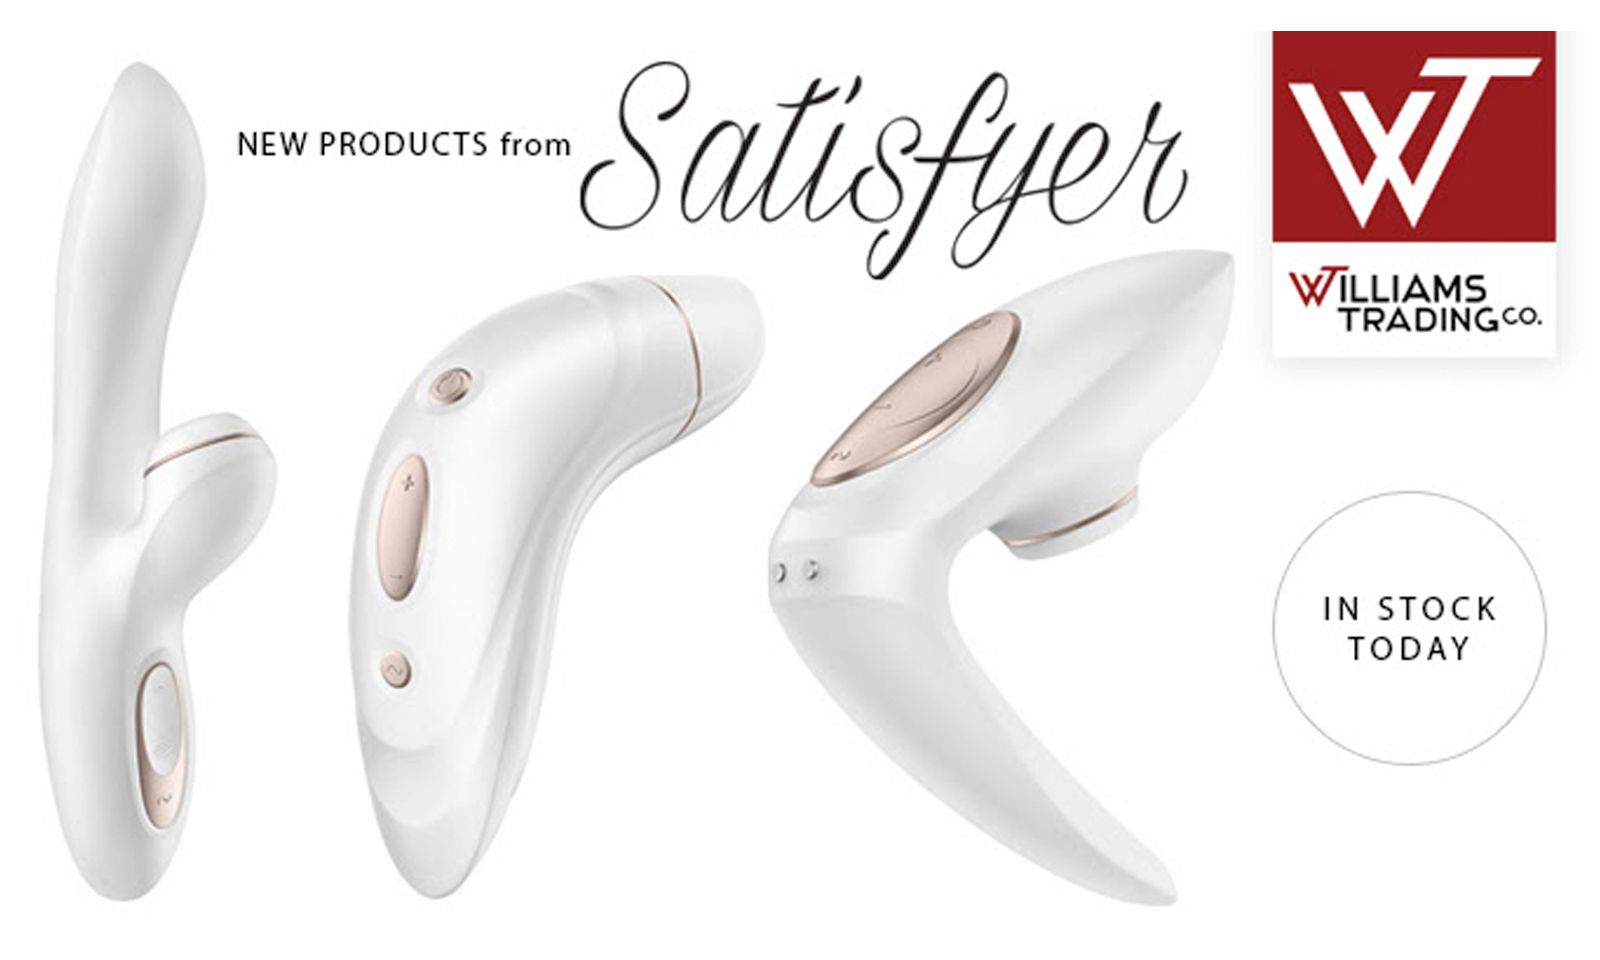 New Satisfyer Pro Products in Stock at Williams Trading